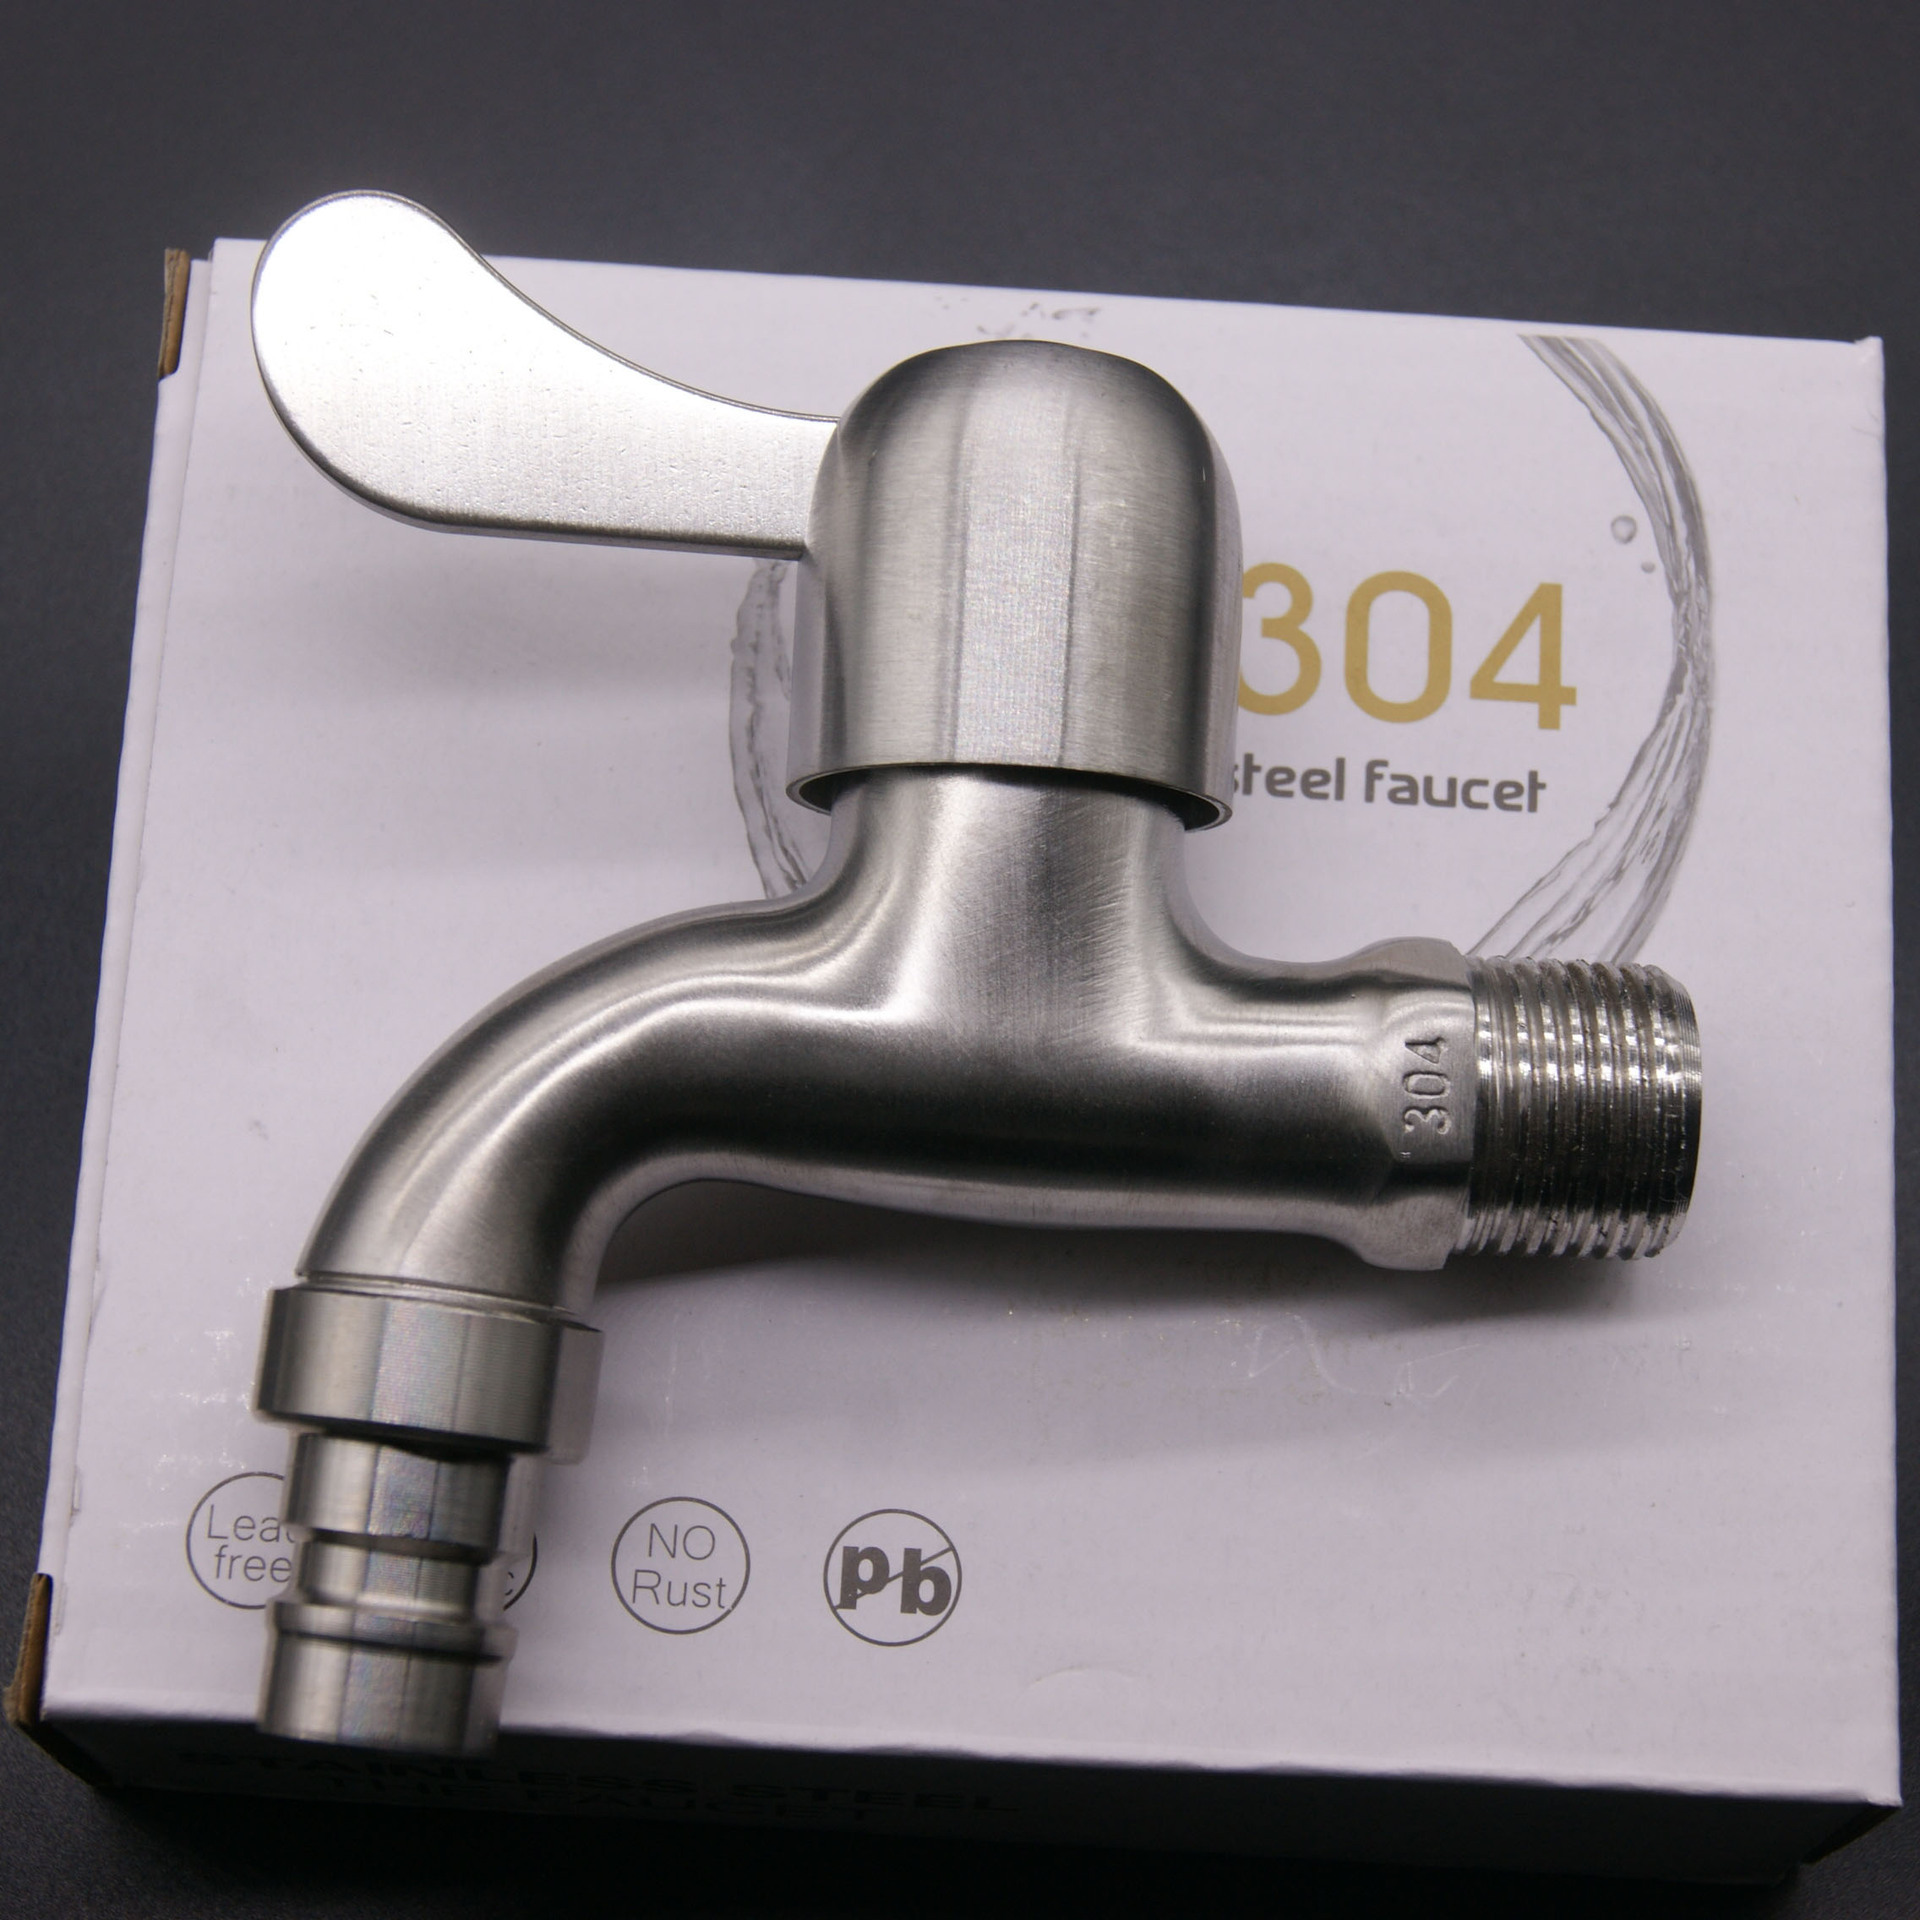 in Stock Wholesale 304 Stainless Steel Faucet Washing Machine Faucet Mop Pool When Cold Water Faucet Faucet